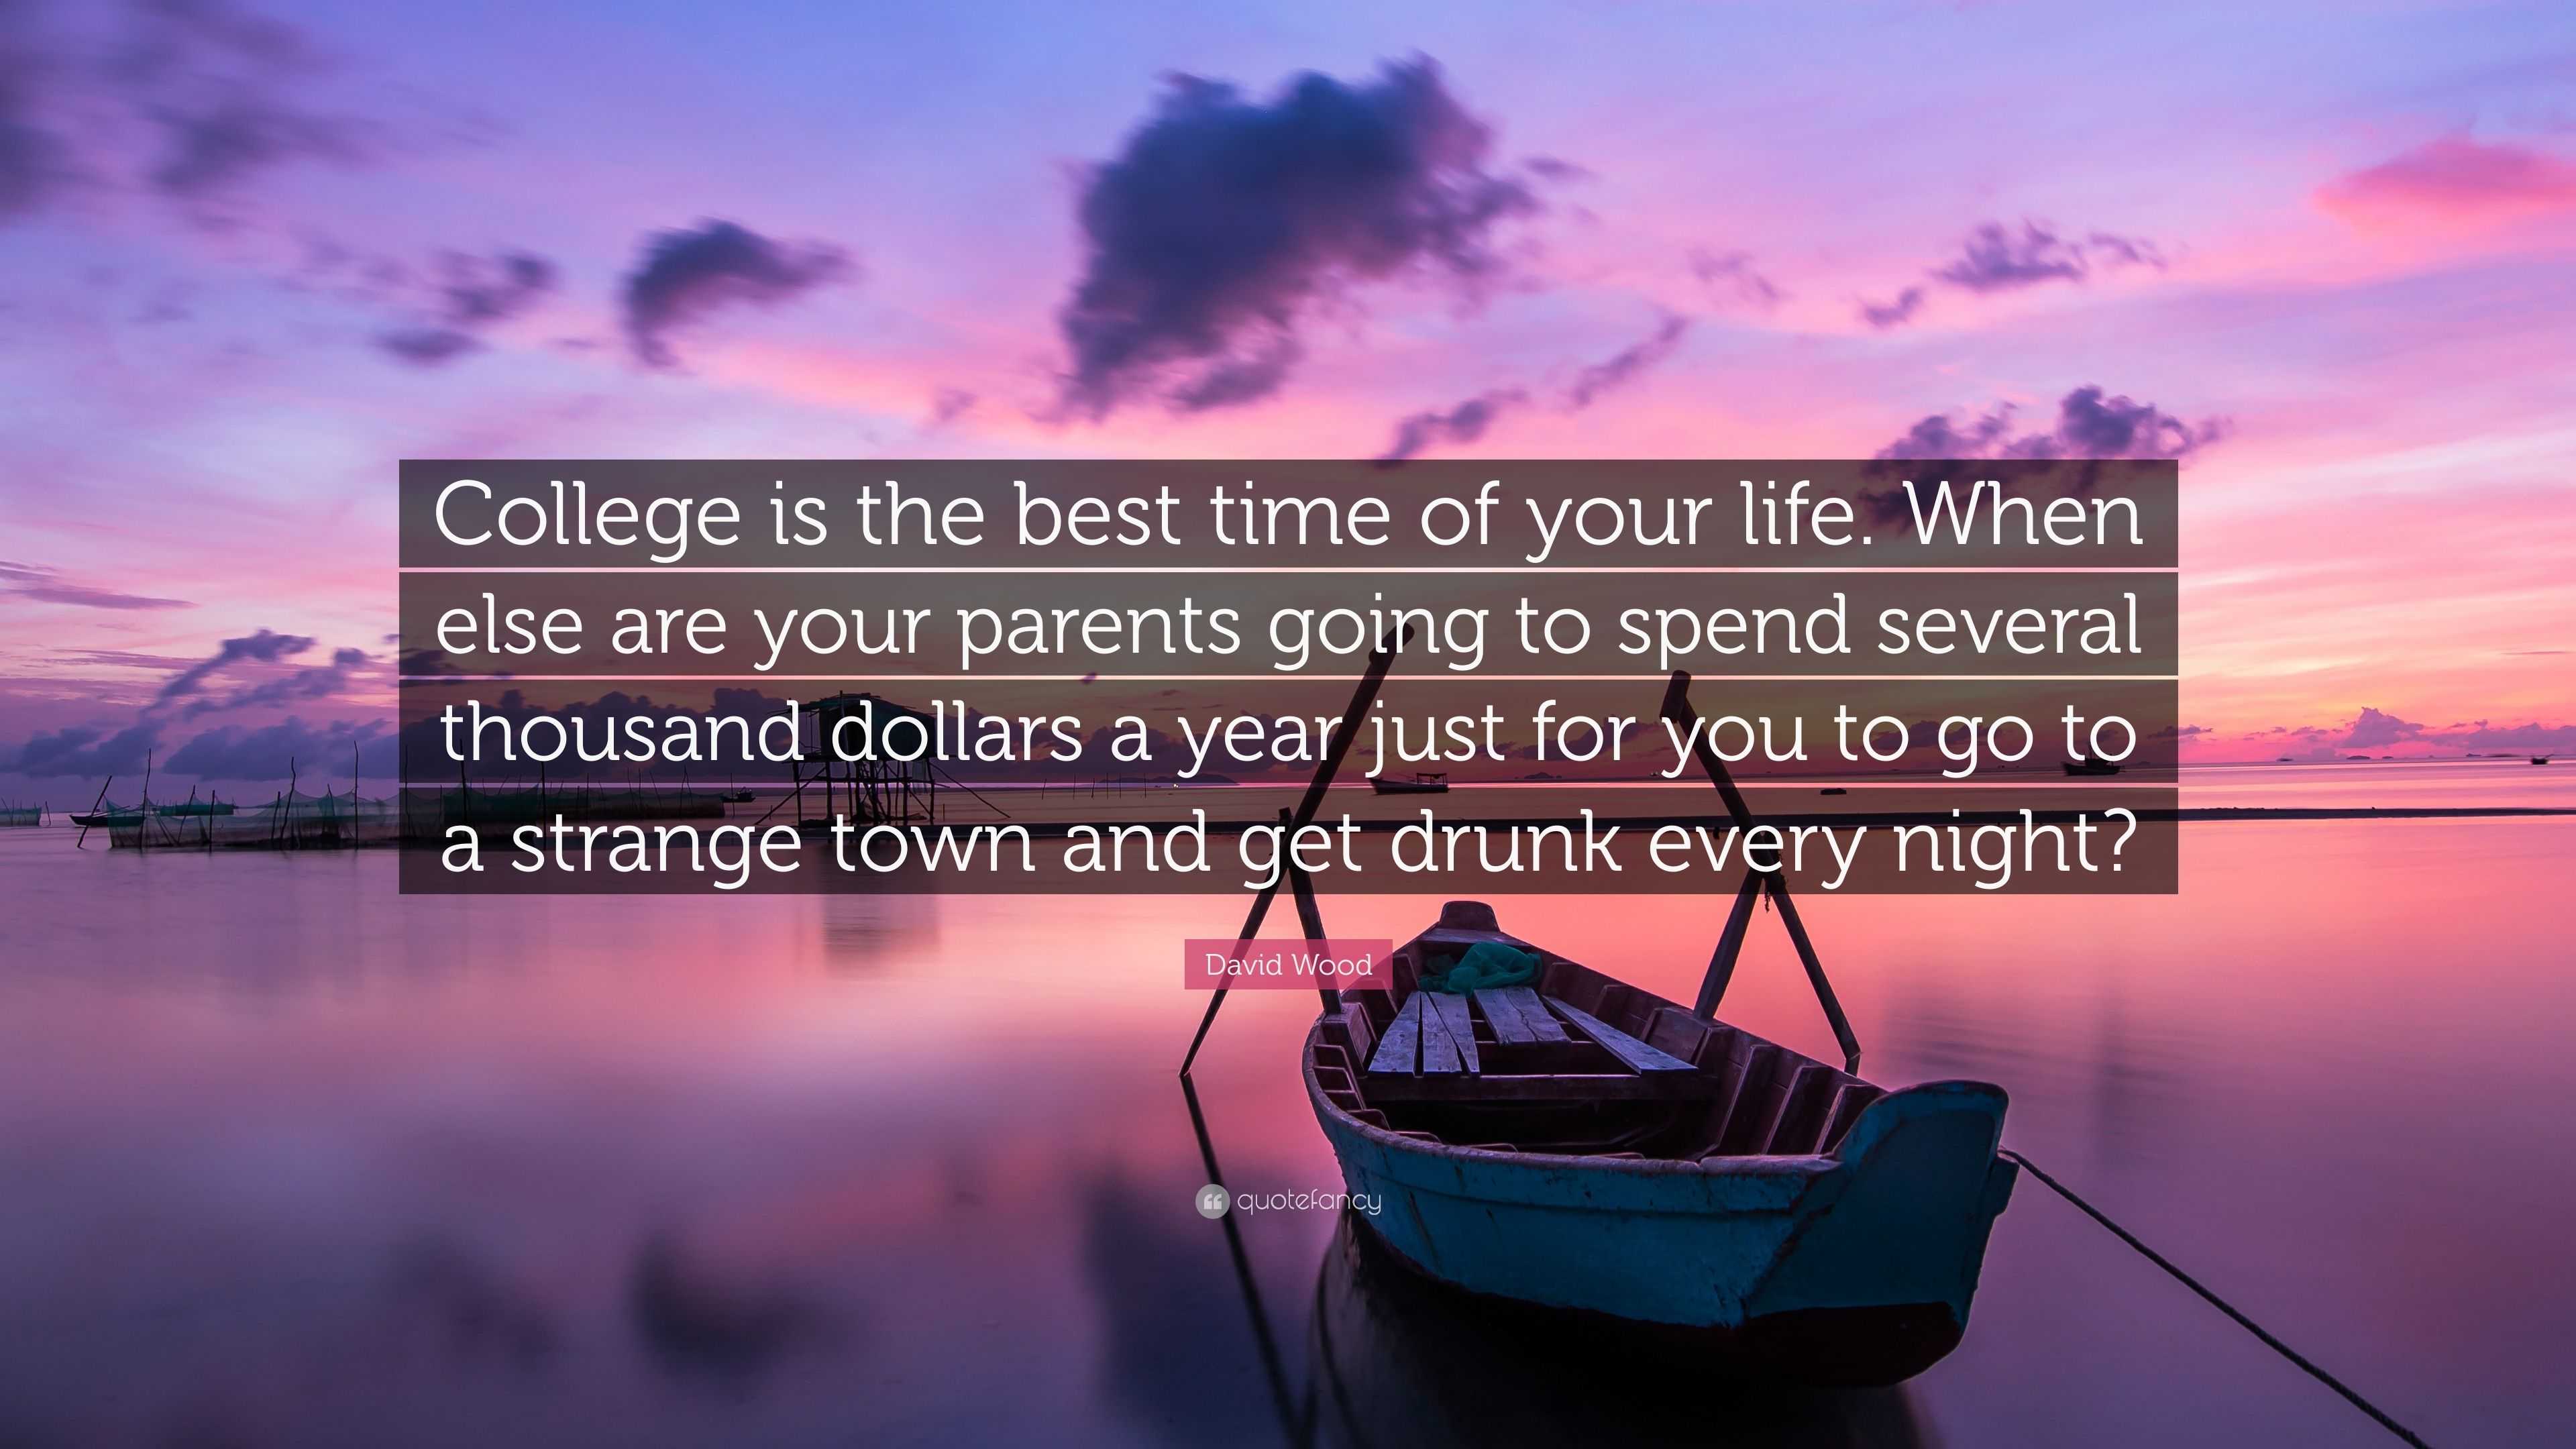 David Wood Quote “College is the best time of your life When else